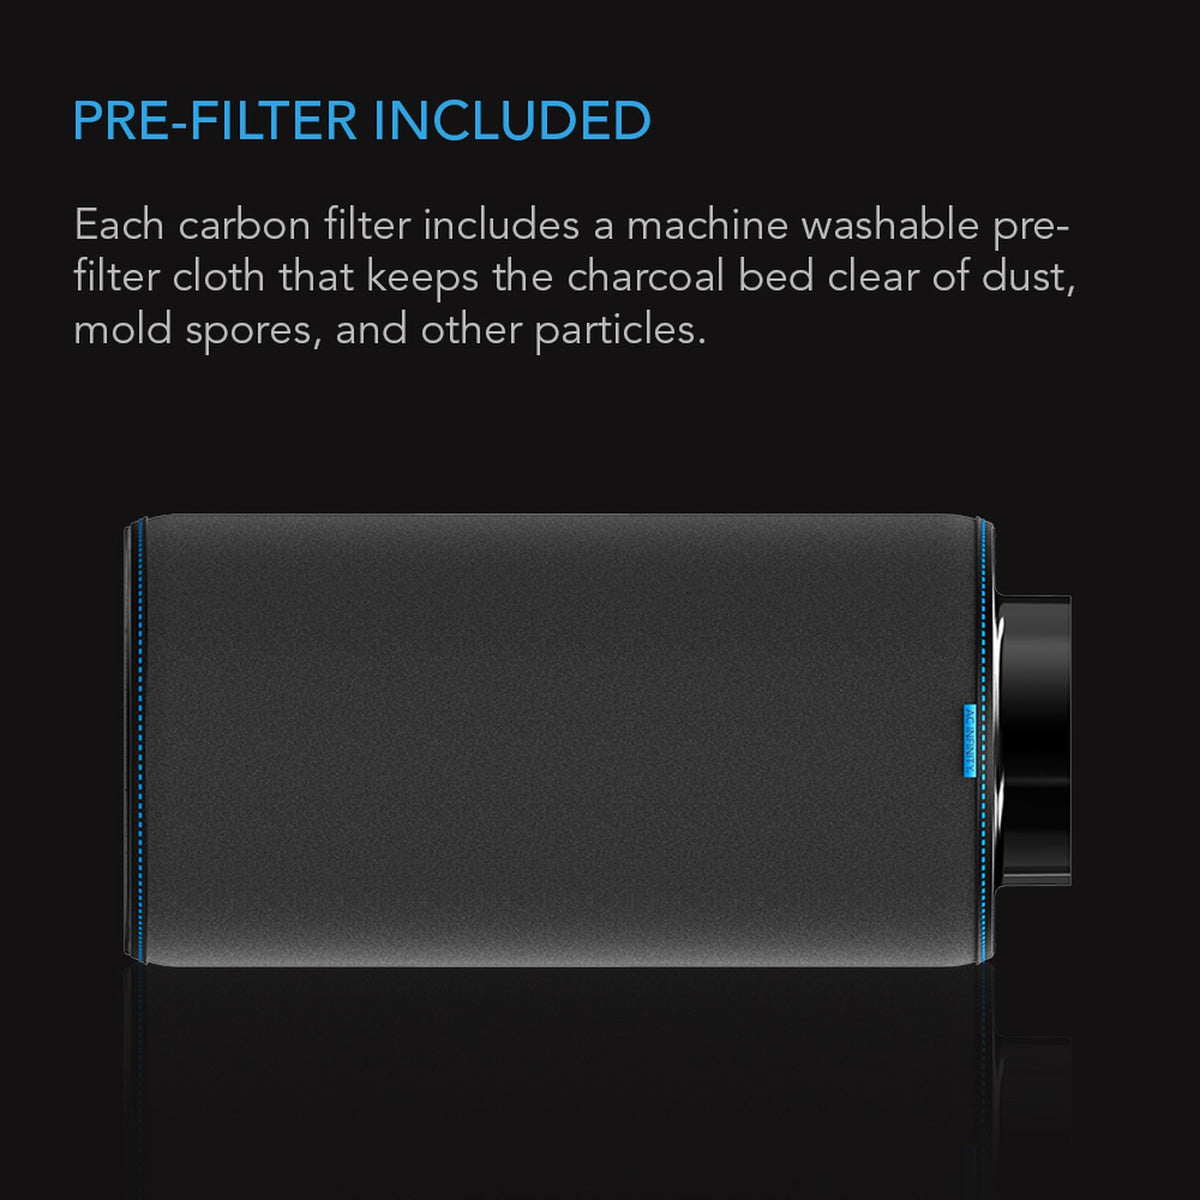 AC Infinity carbon filter pre-filter included